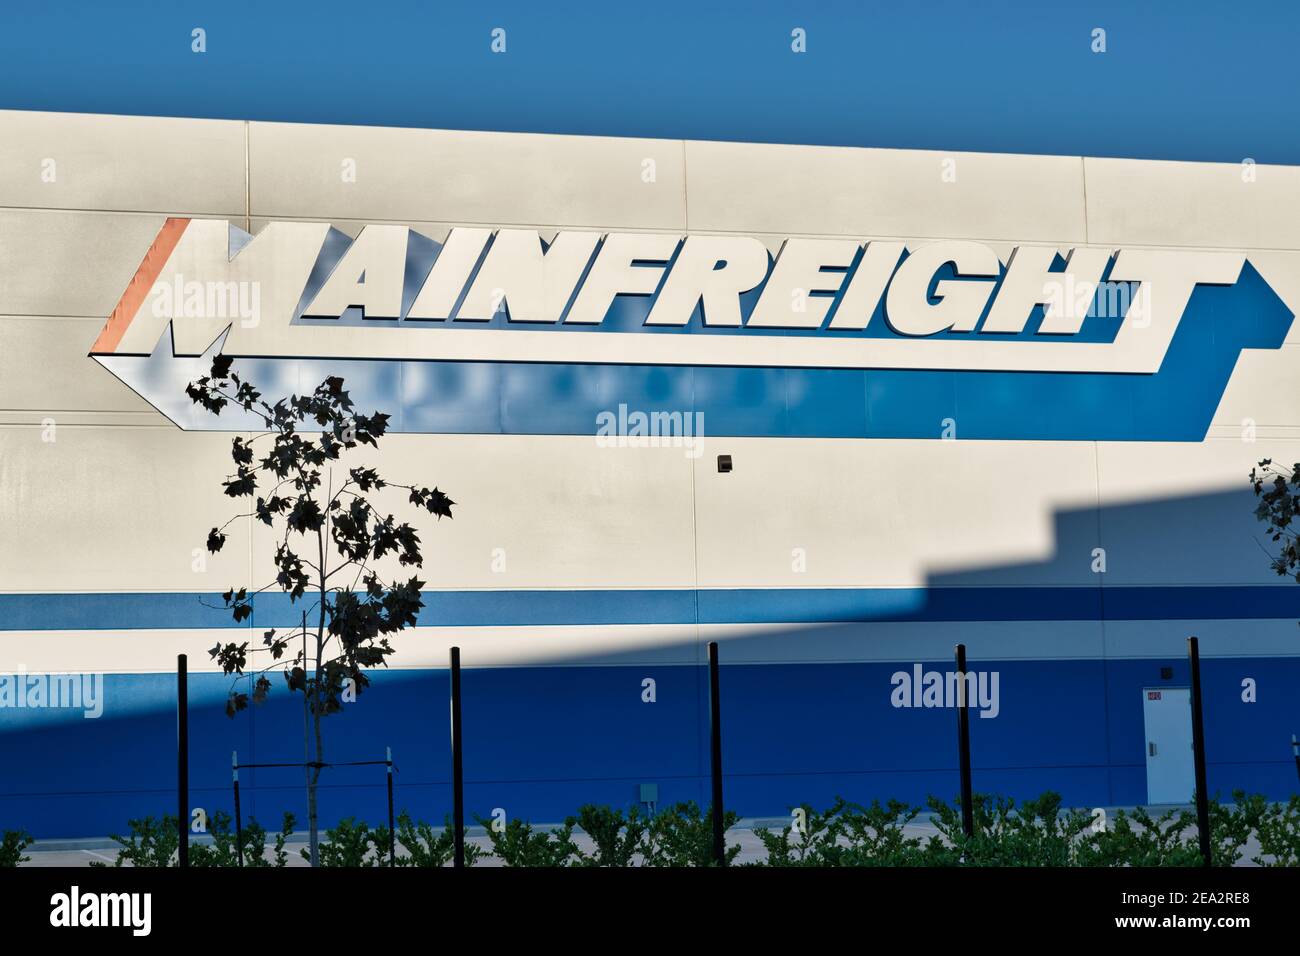 Houston, Texas USA 01-01-2021: Mainfreight building exterior in Houston, TX. Logistics and transportation company founded in Auckland, New Zealand. Stock Photo